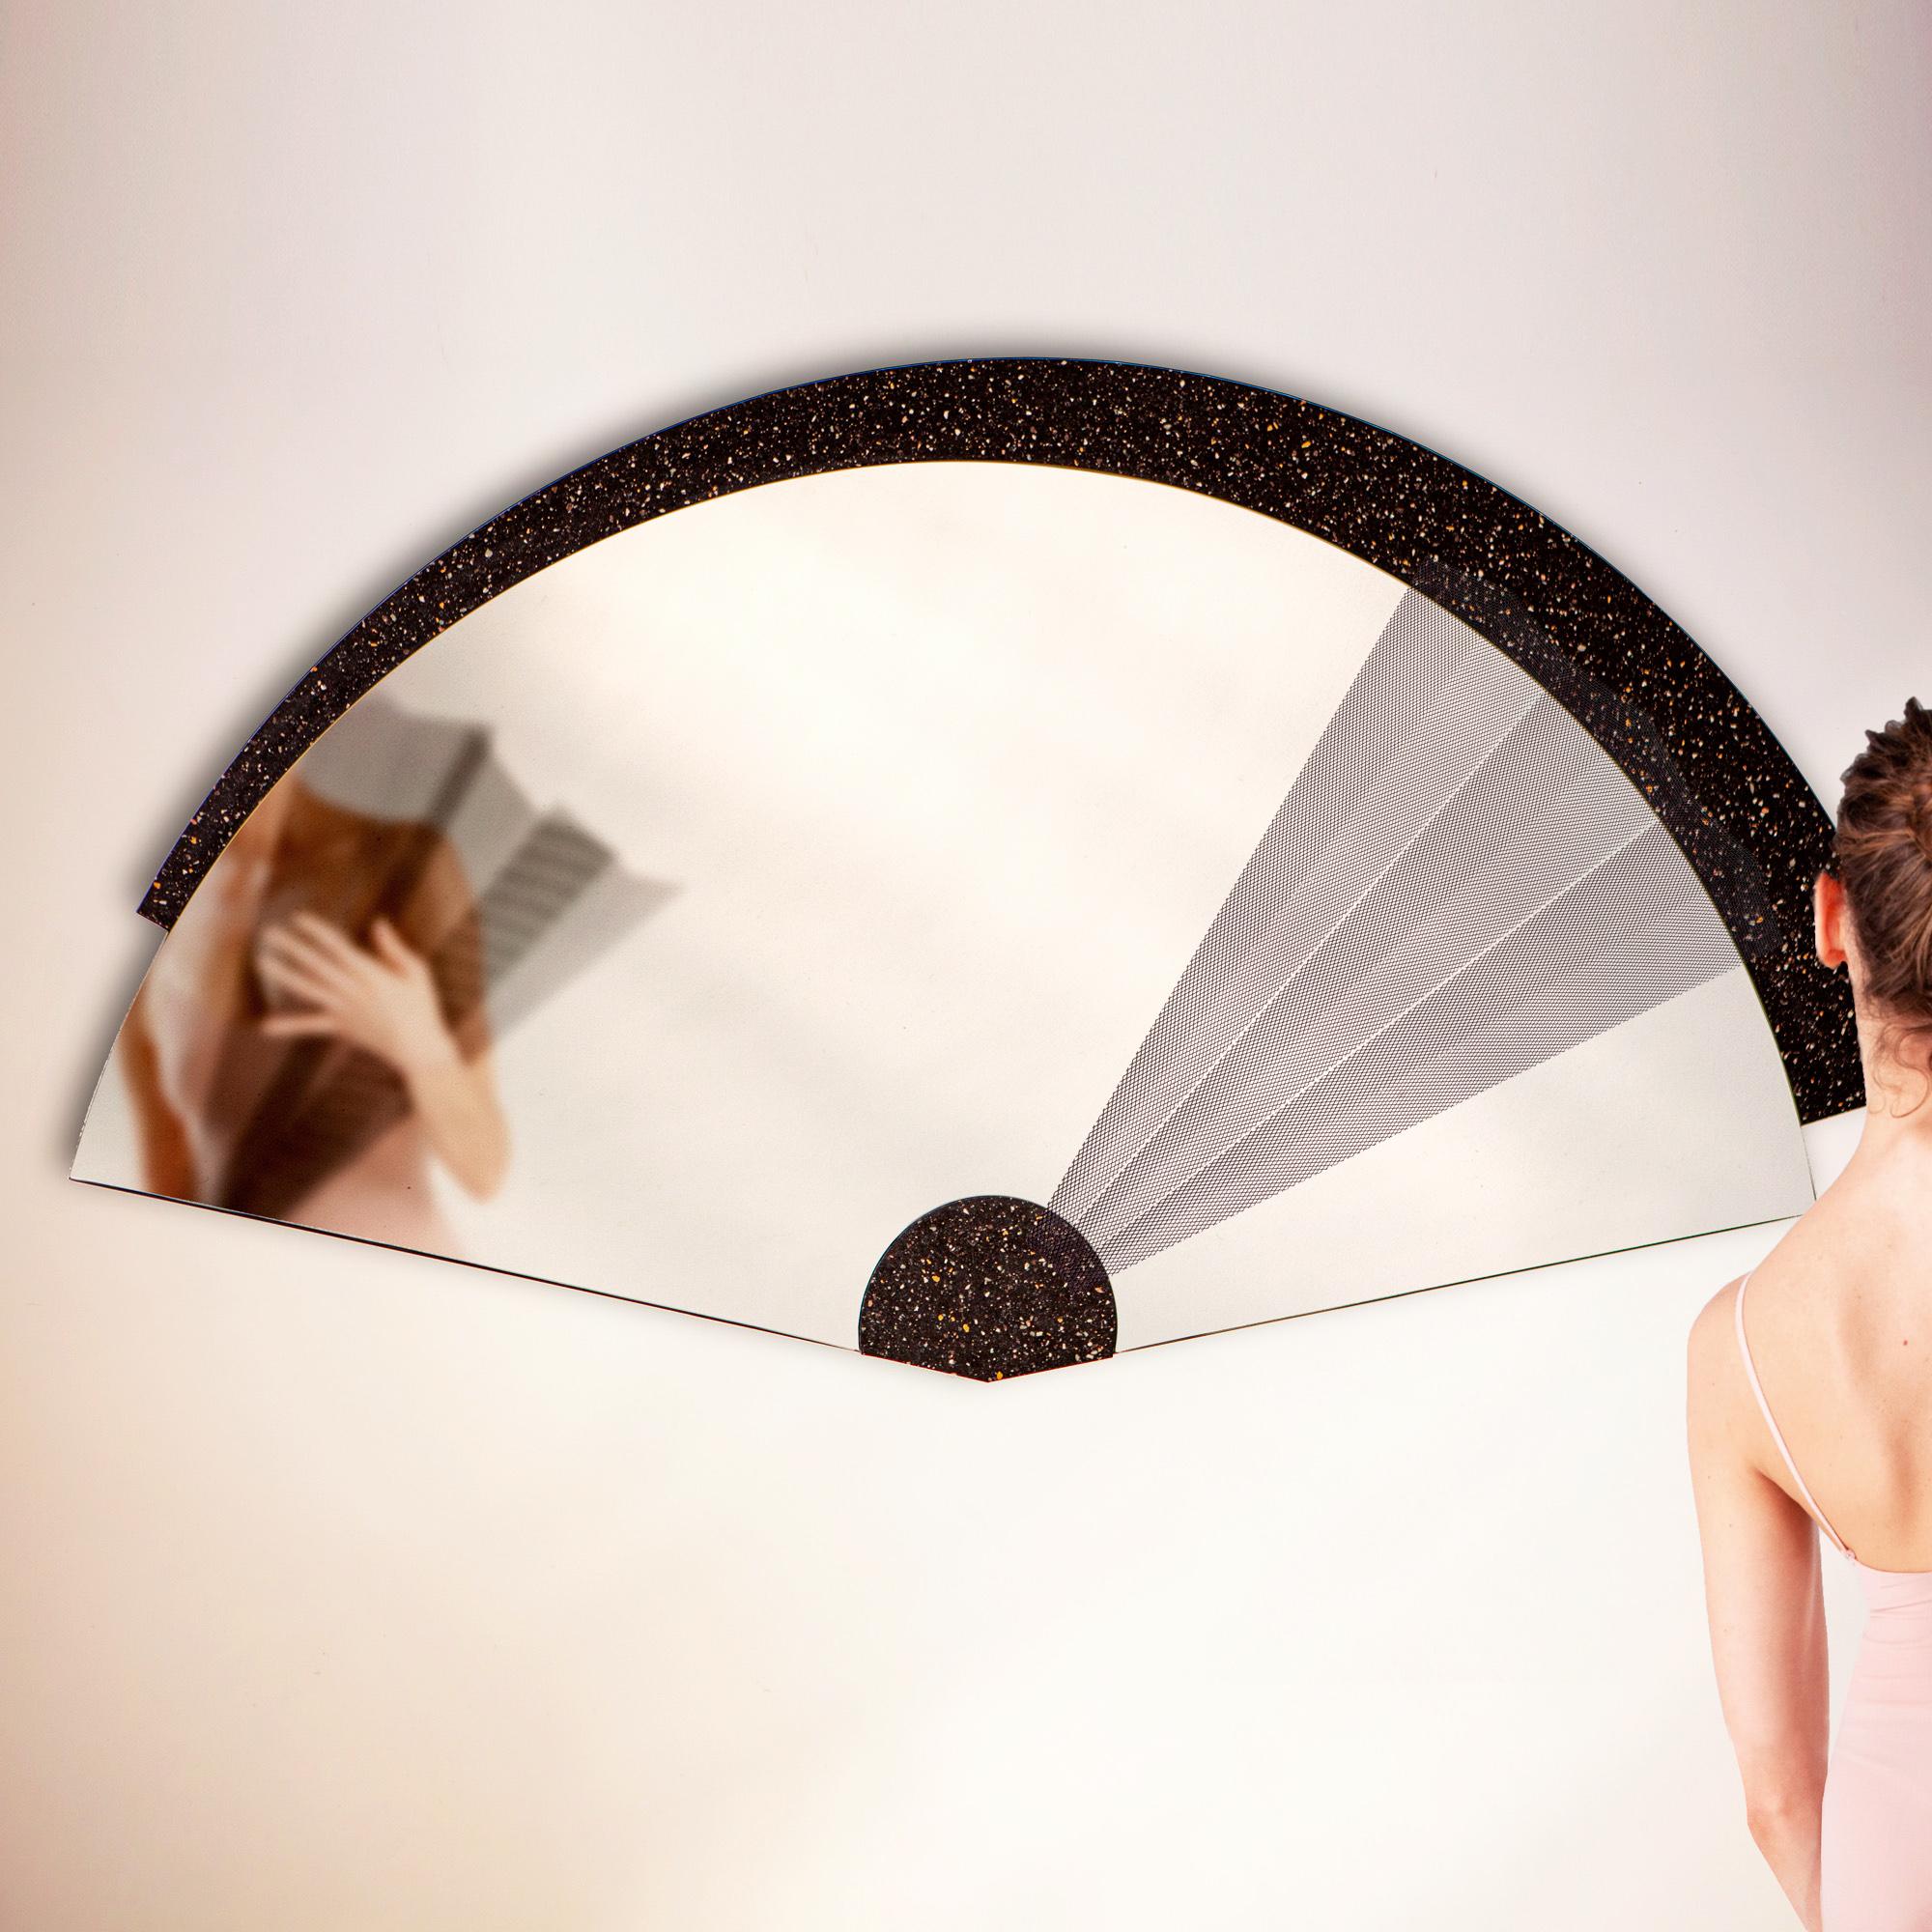 Maiohgi is a fan-shaped wall mirror inspired by the Japanese tradition, whose surface rests on a black stone insert that recalls stars on a black sky. Created by Jacobsroom Studio in Rome, the accessory is completed by six magnetic segments in very